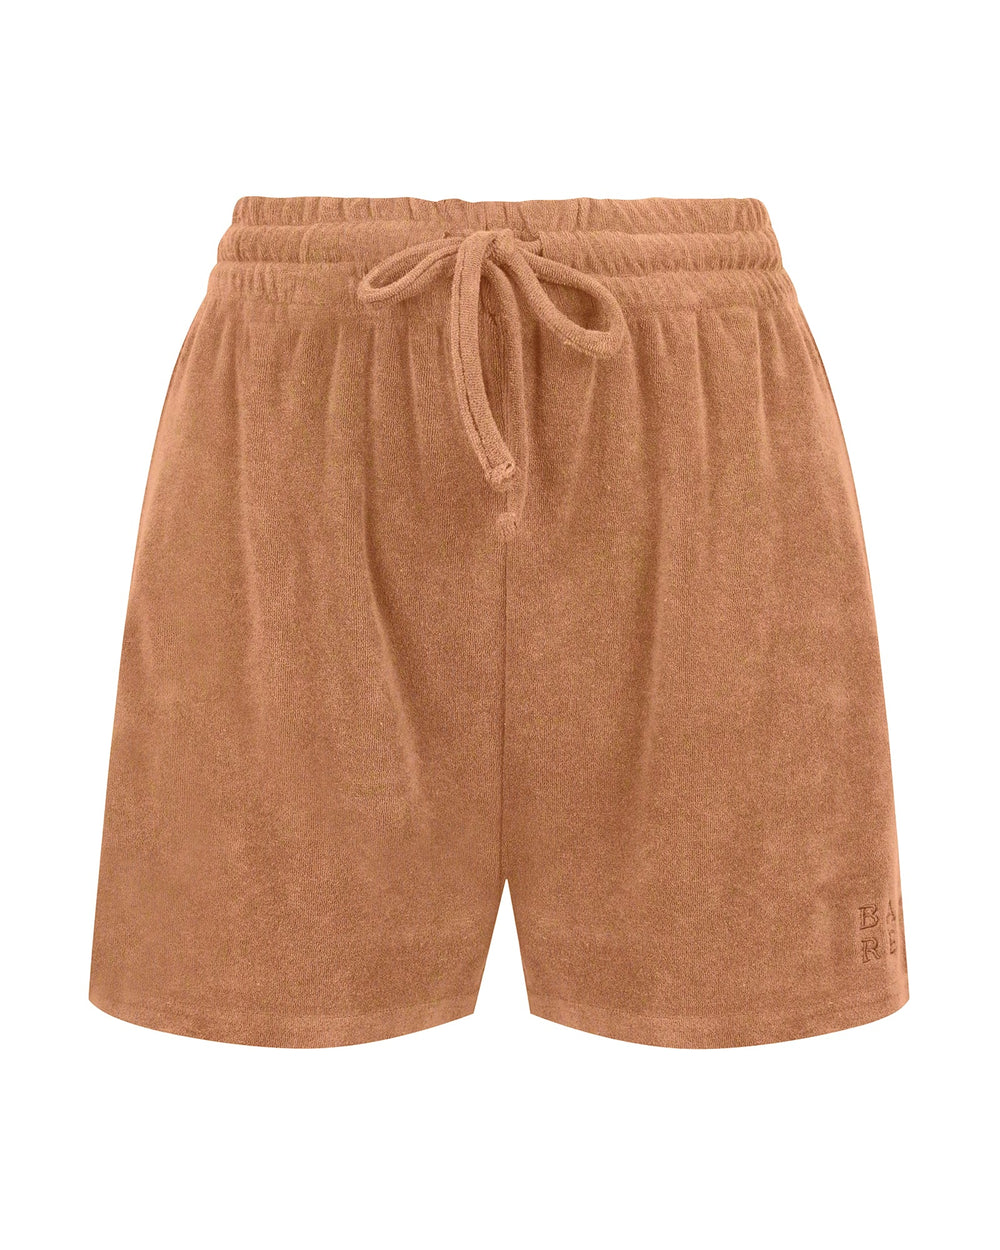 The Terry Towelling Short